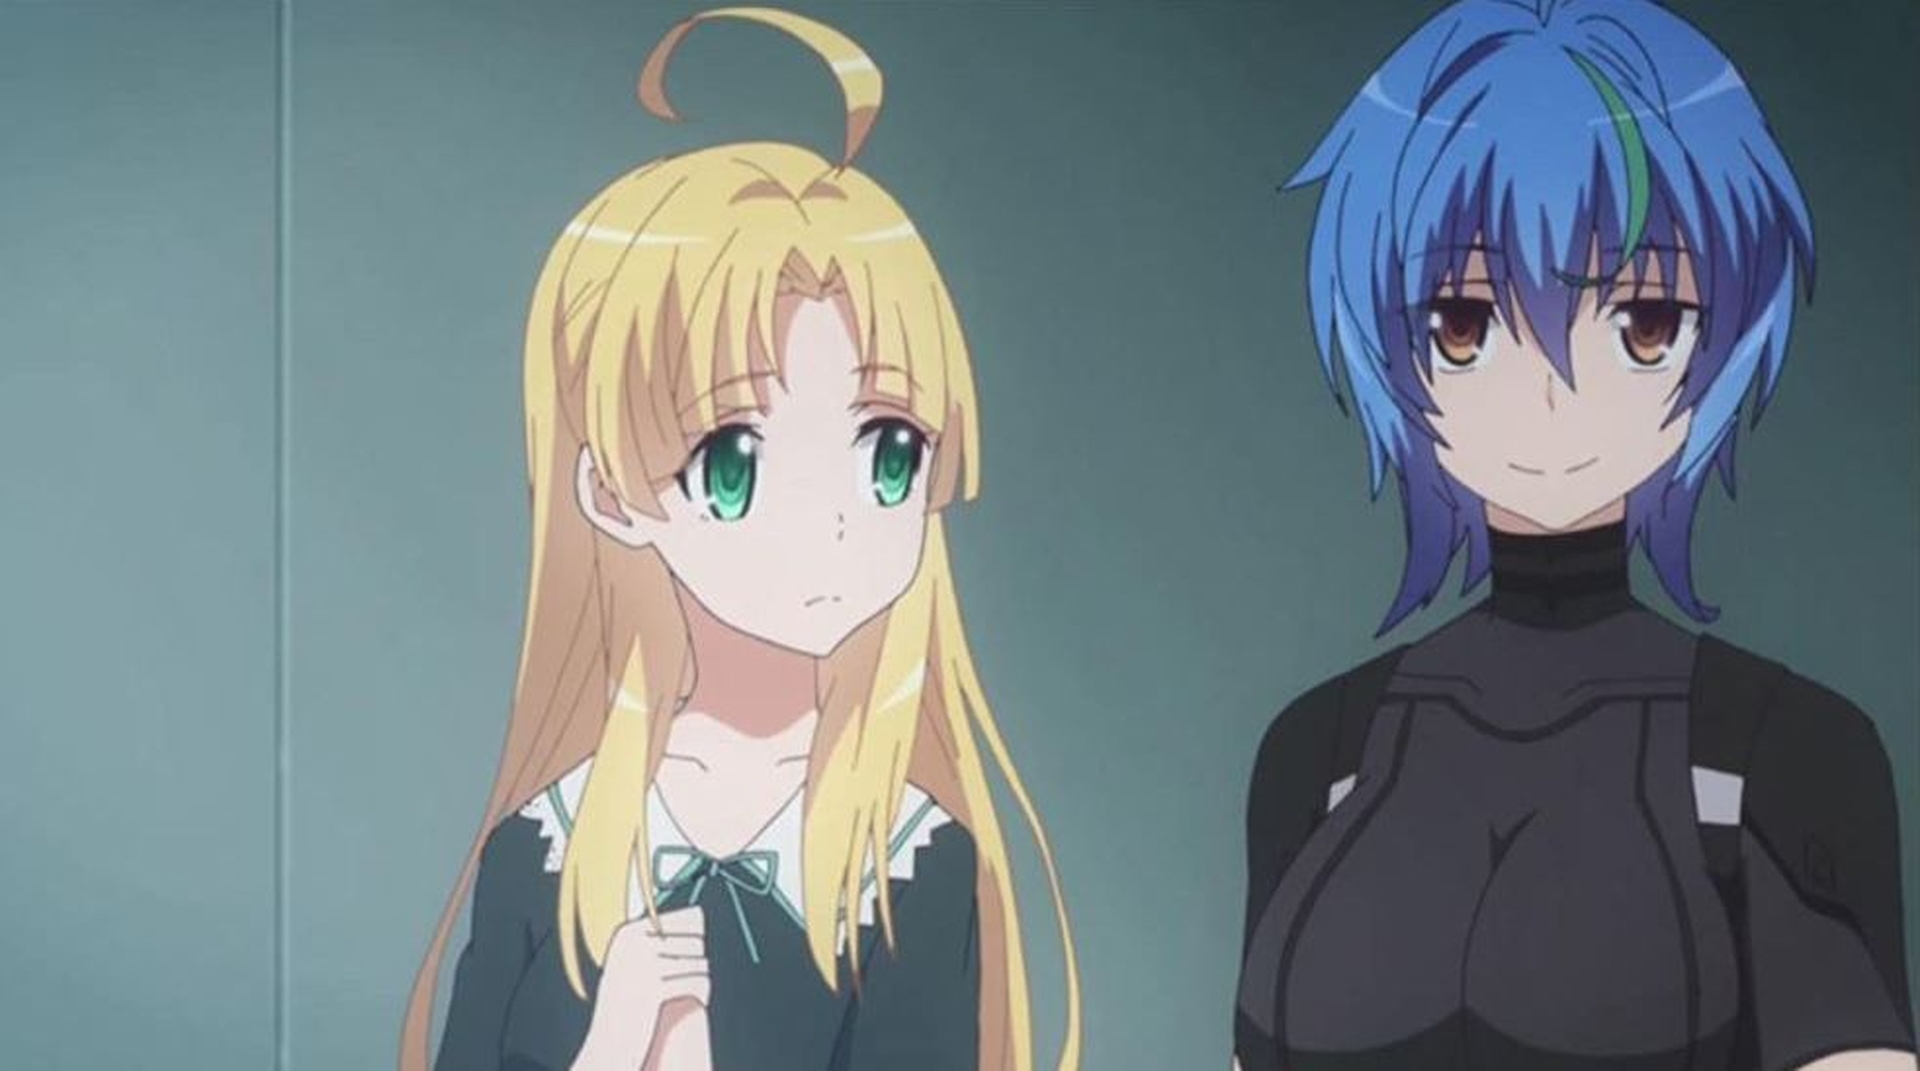 In this article, we are going to be covering Highschool DxD Season 5 release date, plot, and more, so you can learn all there is to know about this beloved anime.